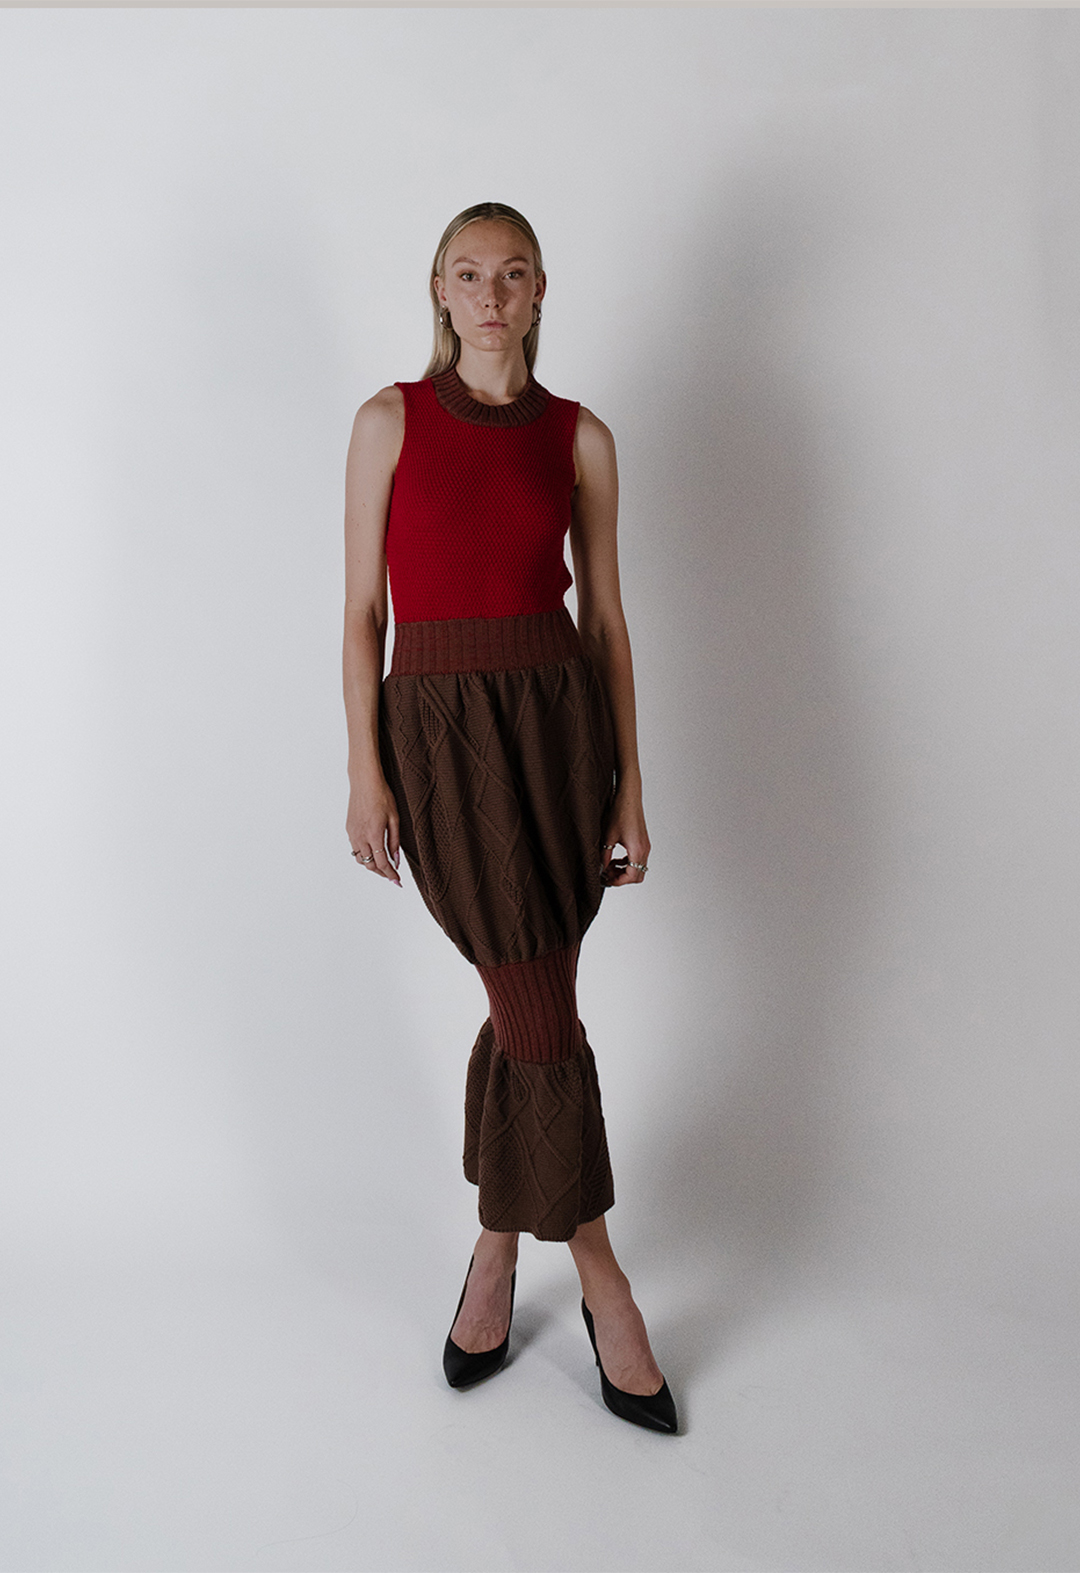 This is a red-and-brown sleeveless mock neck dress. There are two heather red and brown rib sections, at the waist and the knee, creating a balloon effect on the skirt. The top of the skirt is bright red with moss stitching. The balloon skirt is filled with irregular Aran cables, with a mix of moss, link links, and ribbing. The model is standing in black high heels with her legs crossed. The background is white.